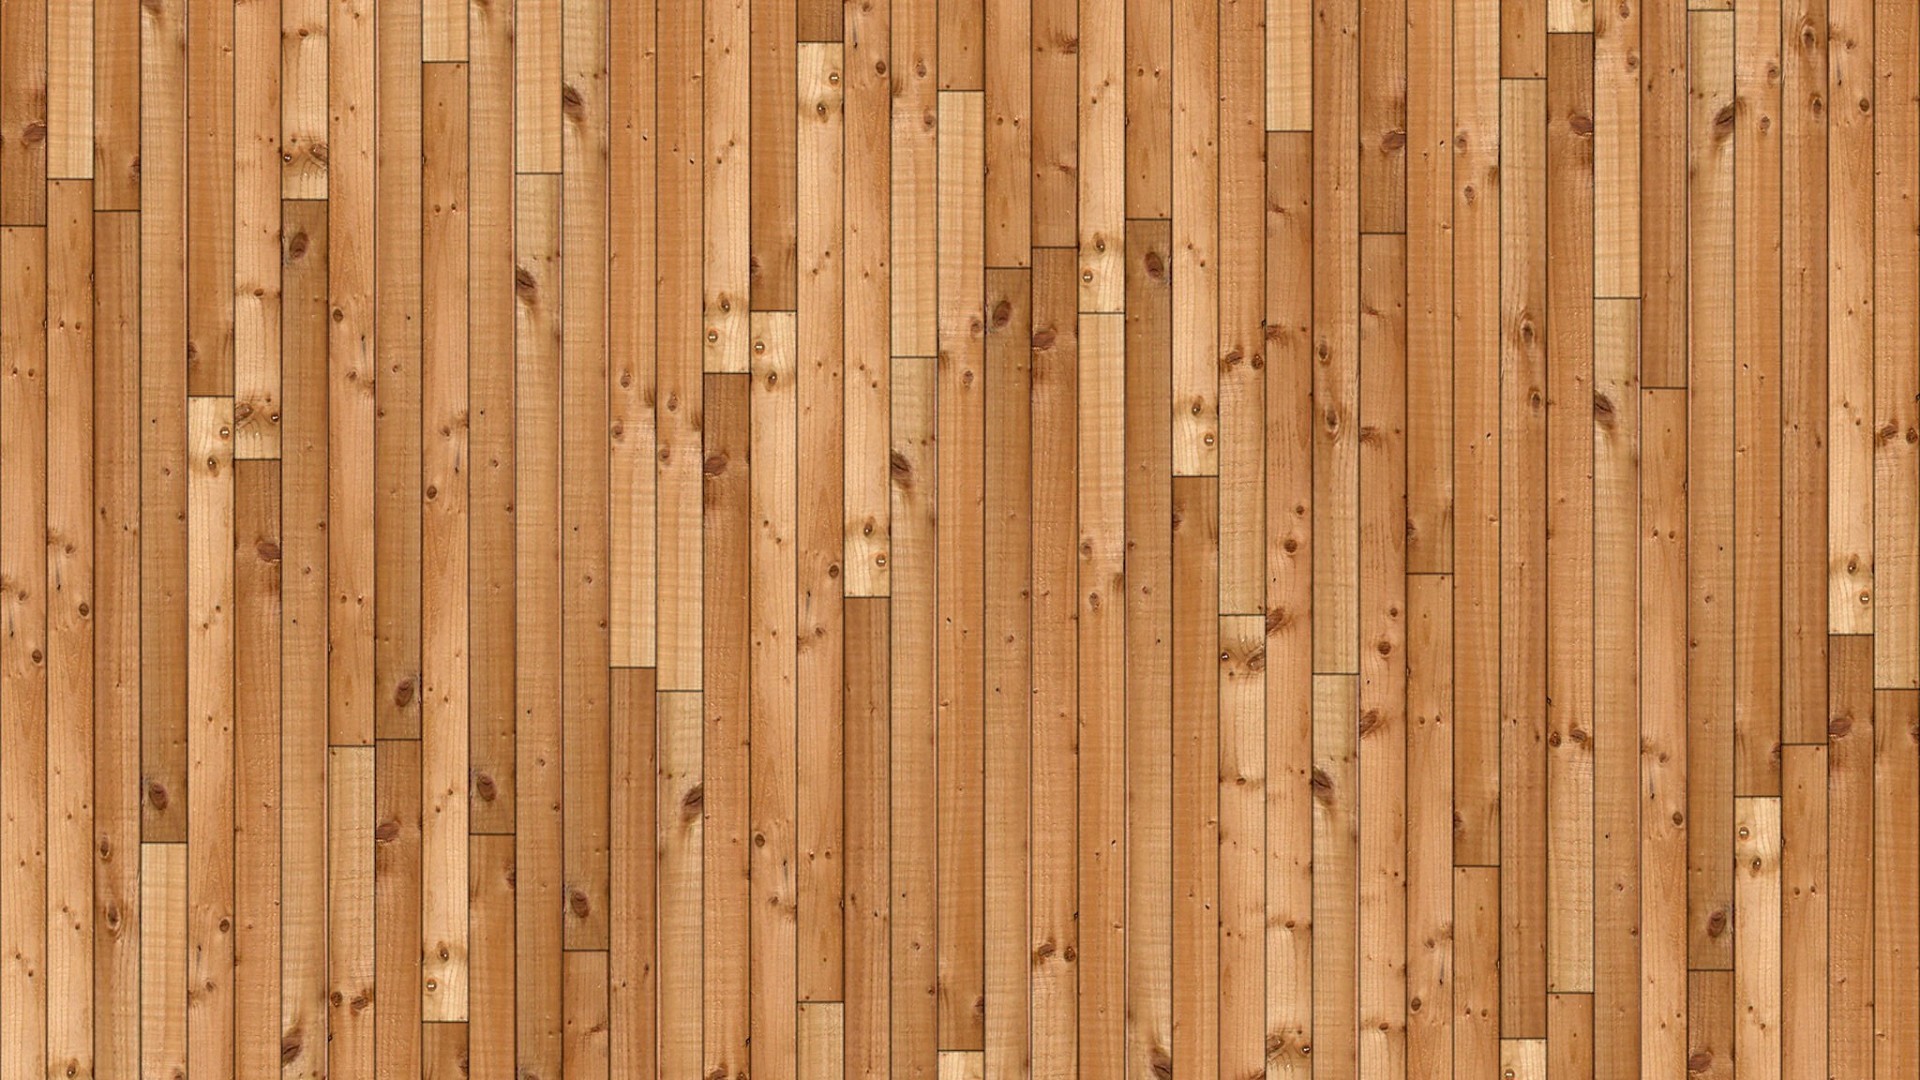 1920x1080 Wood Wallpaper Backgrounds (27 Wallpapers)